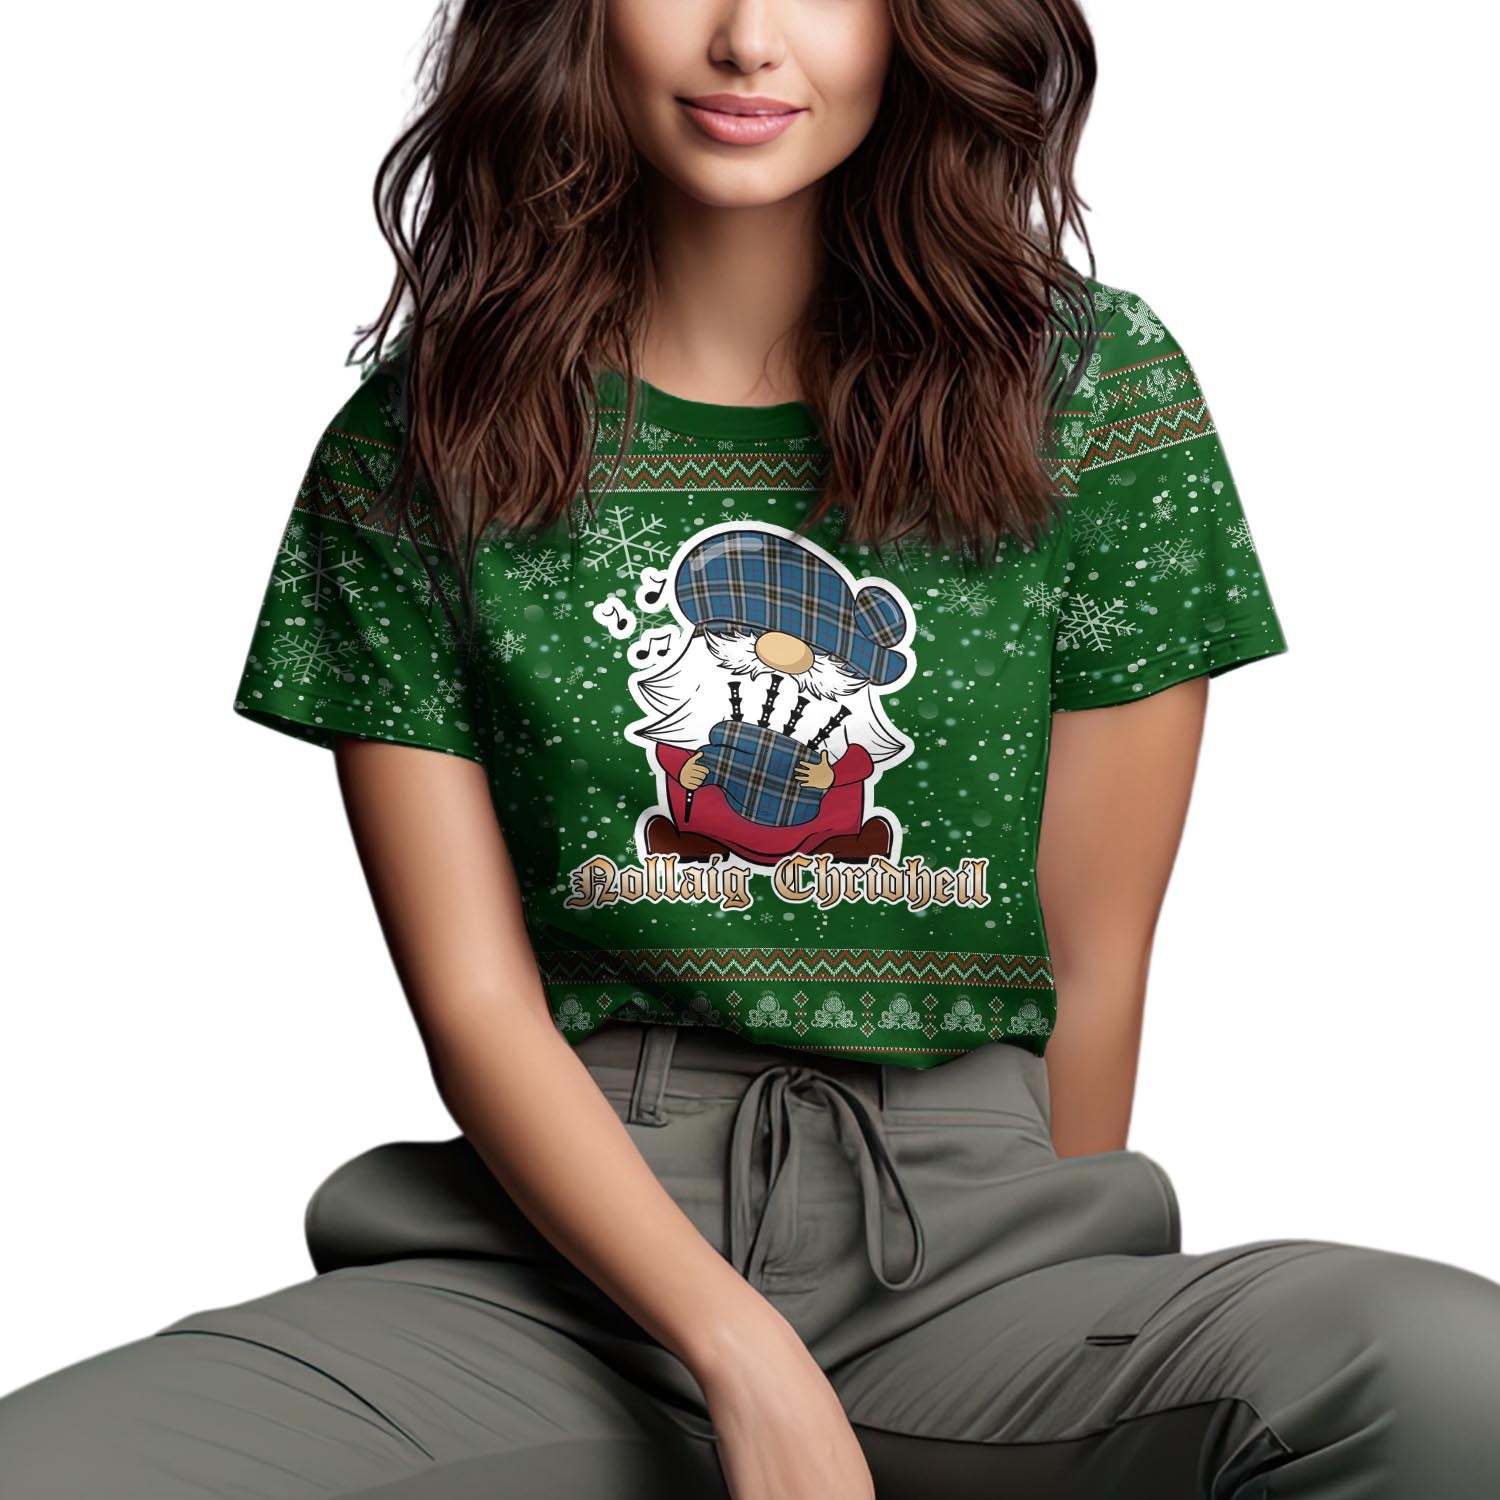 Thomson Dress Blue Clan Christmas Family T-Shirt with Funny Gnome Playing Bagpipes Women's Shirt Green - Tartanvibesclothing